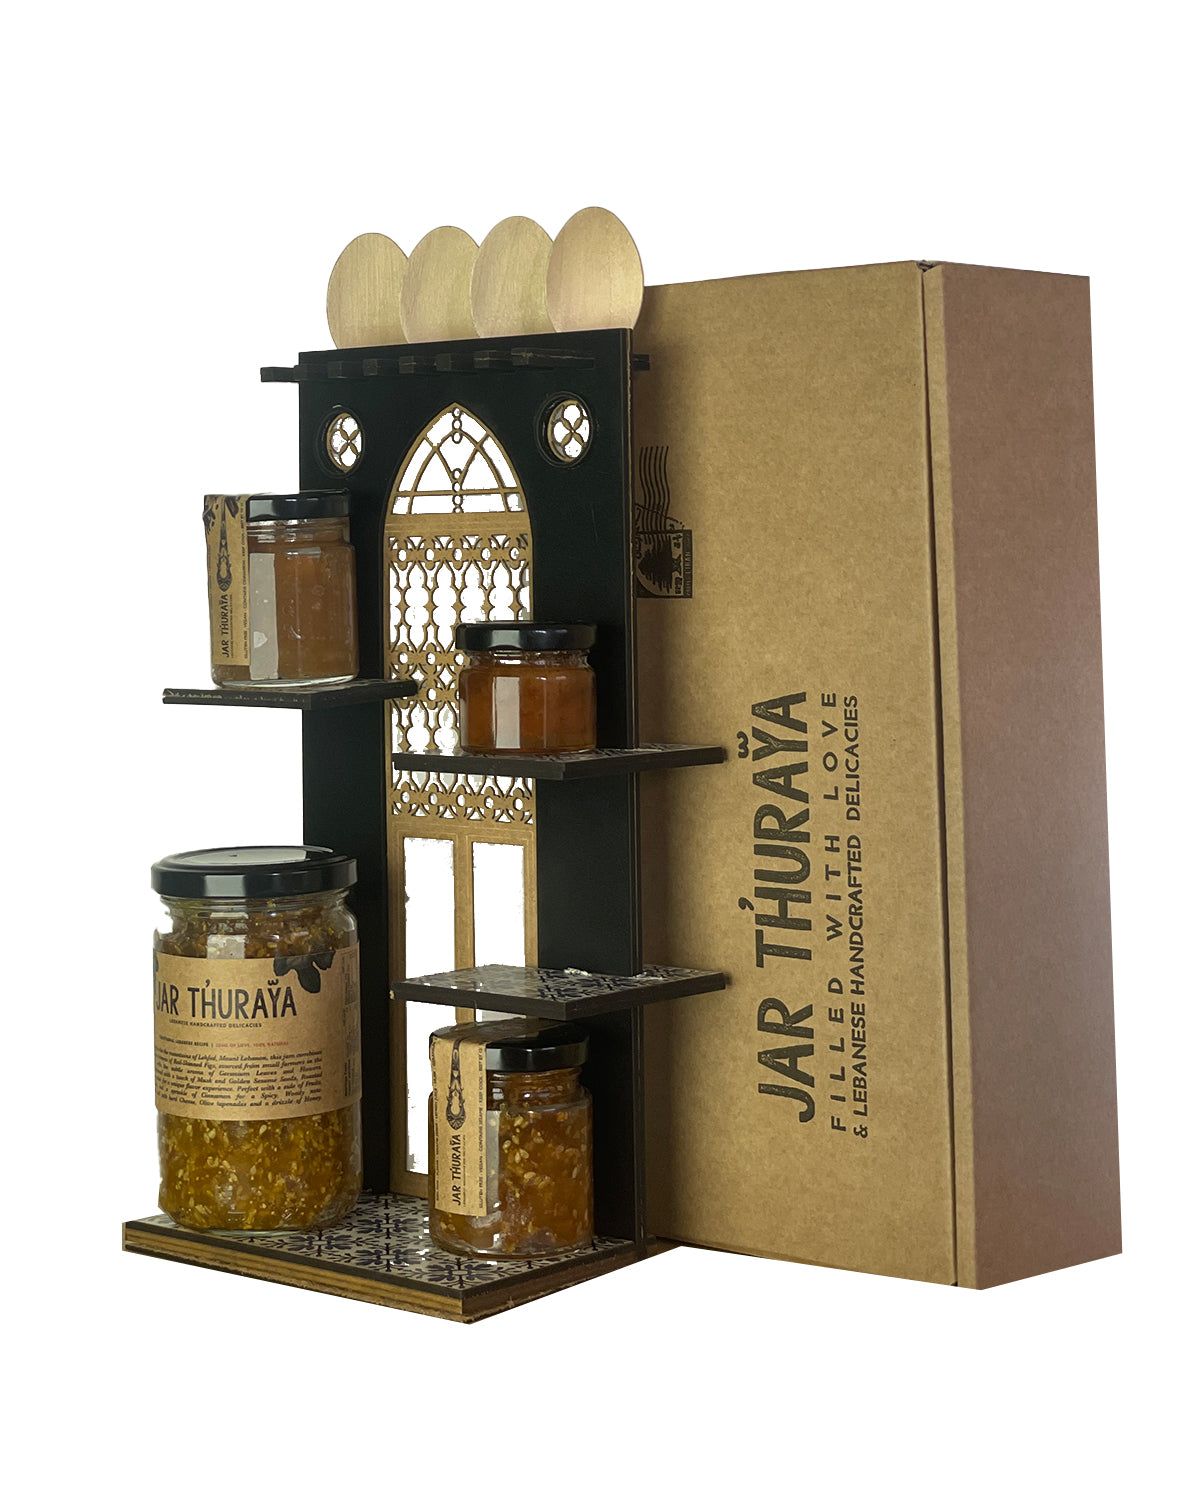 a kitchen rack for jars made with wood and representing lebanese heritage. its a DIY rack made in lebanon in a gift box